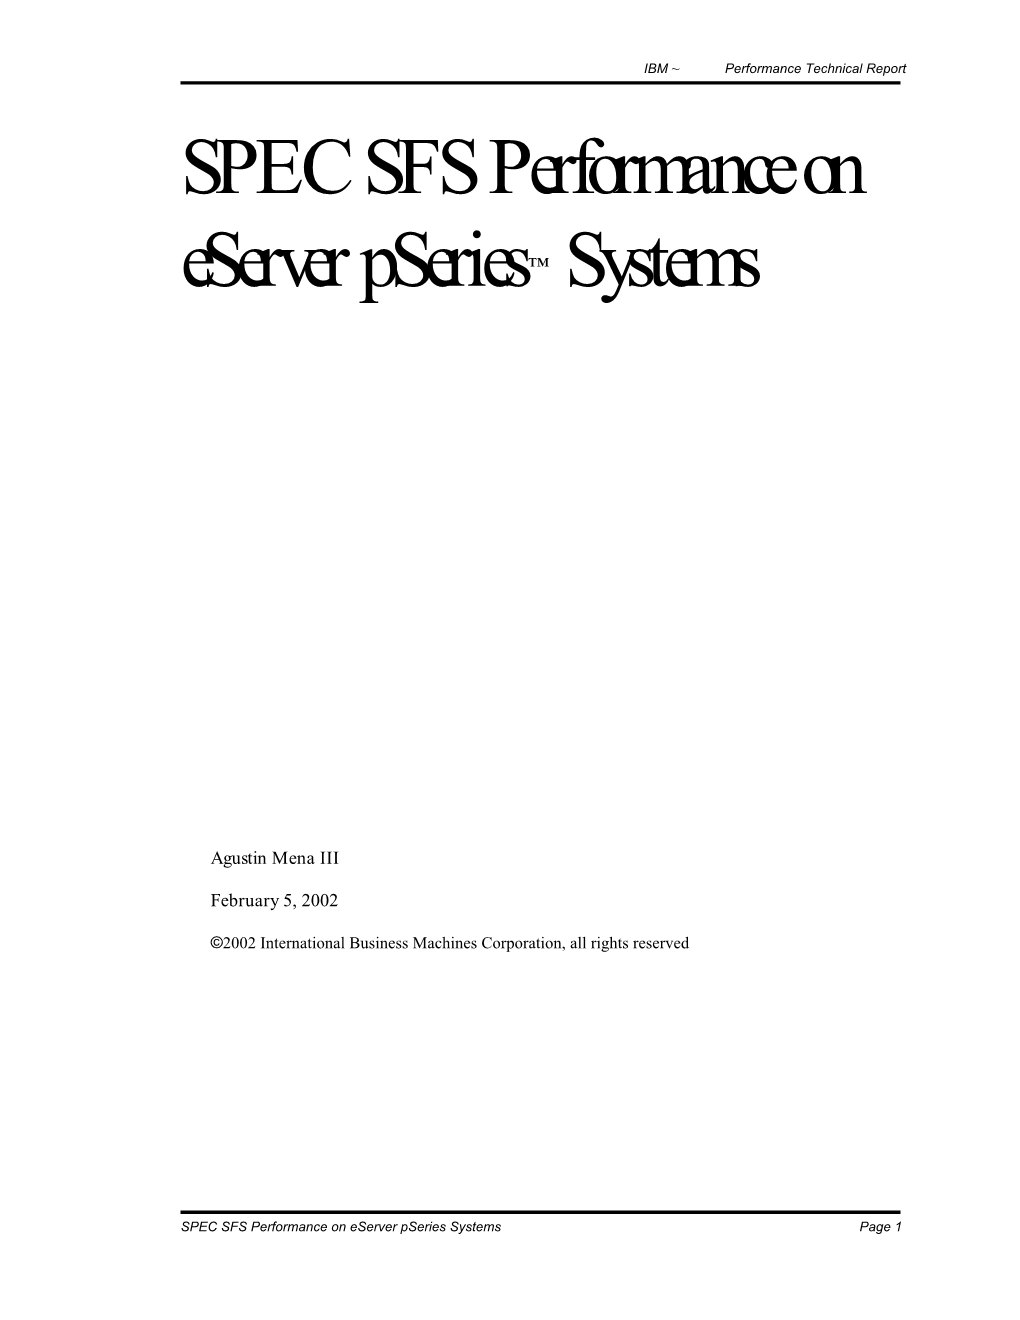 SPEC SFS Performance on Eserver Pseries Systems Page 1 IBM ~ Performance Technical Report